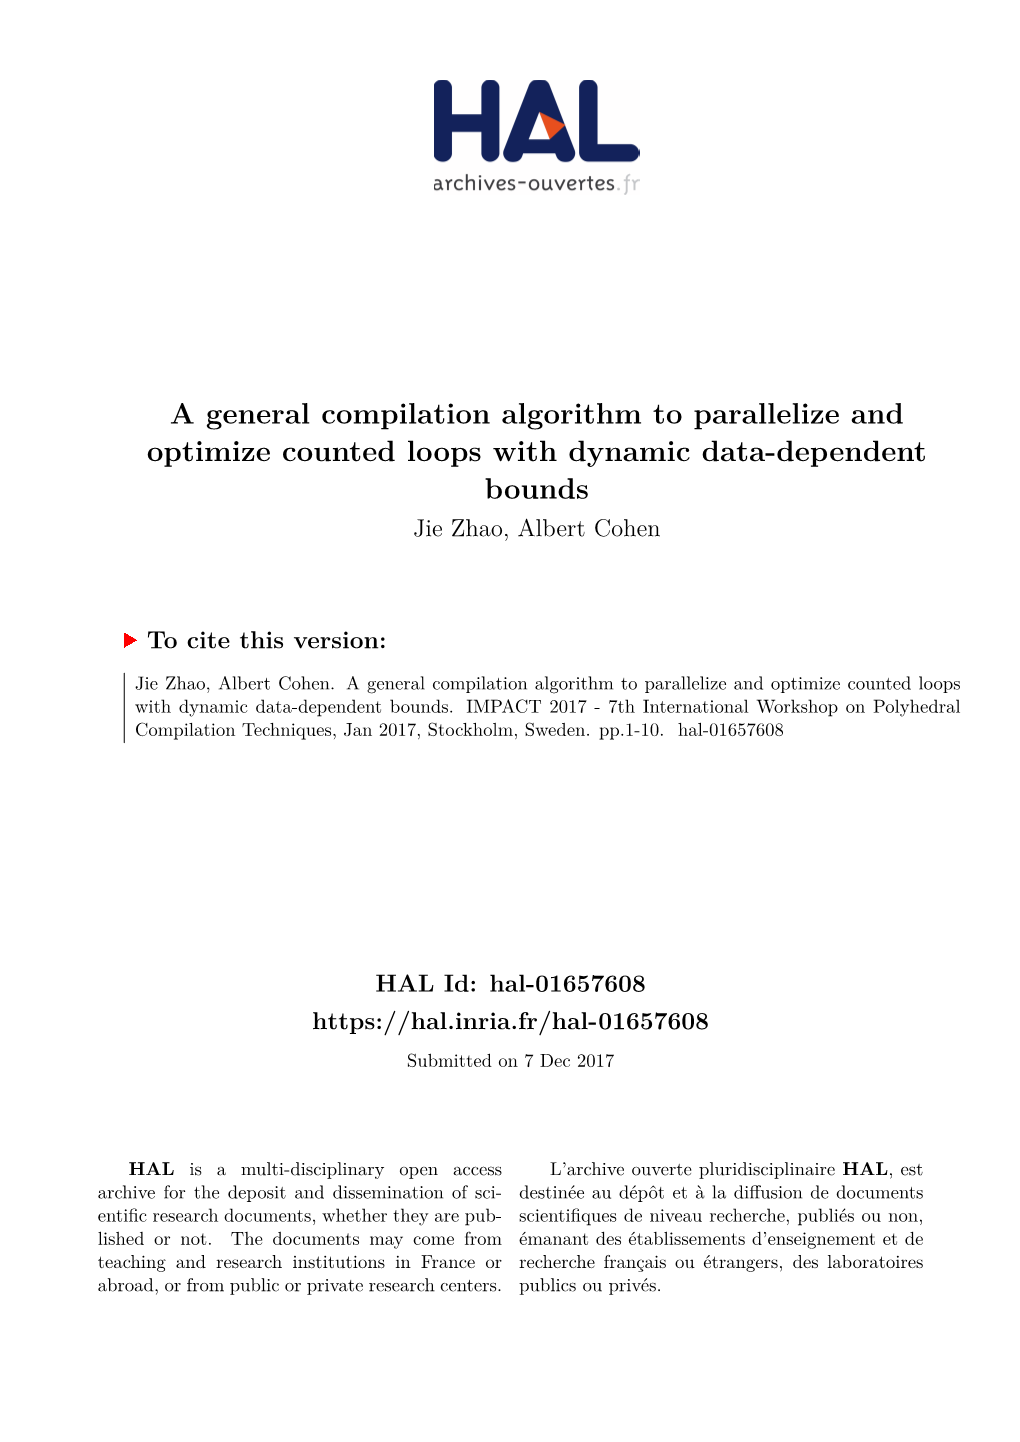 A General Compilation Algorithm to Parallelize and Optimize Counted Loops with Dynamic Data-Dependent Bounds Jie Zhao, Albert Cohen